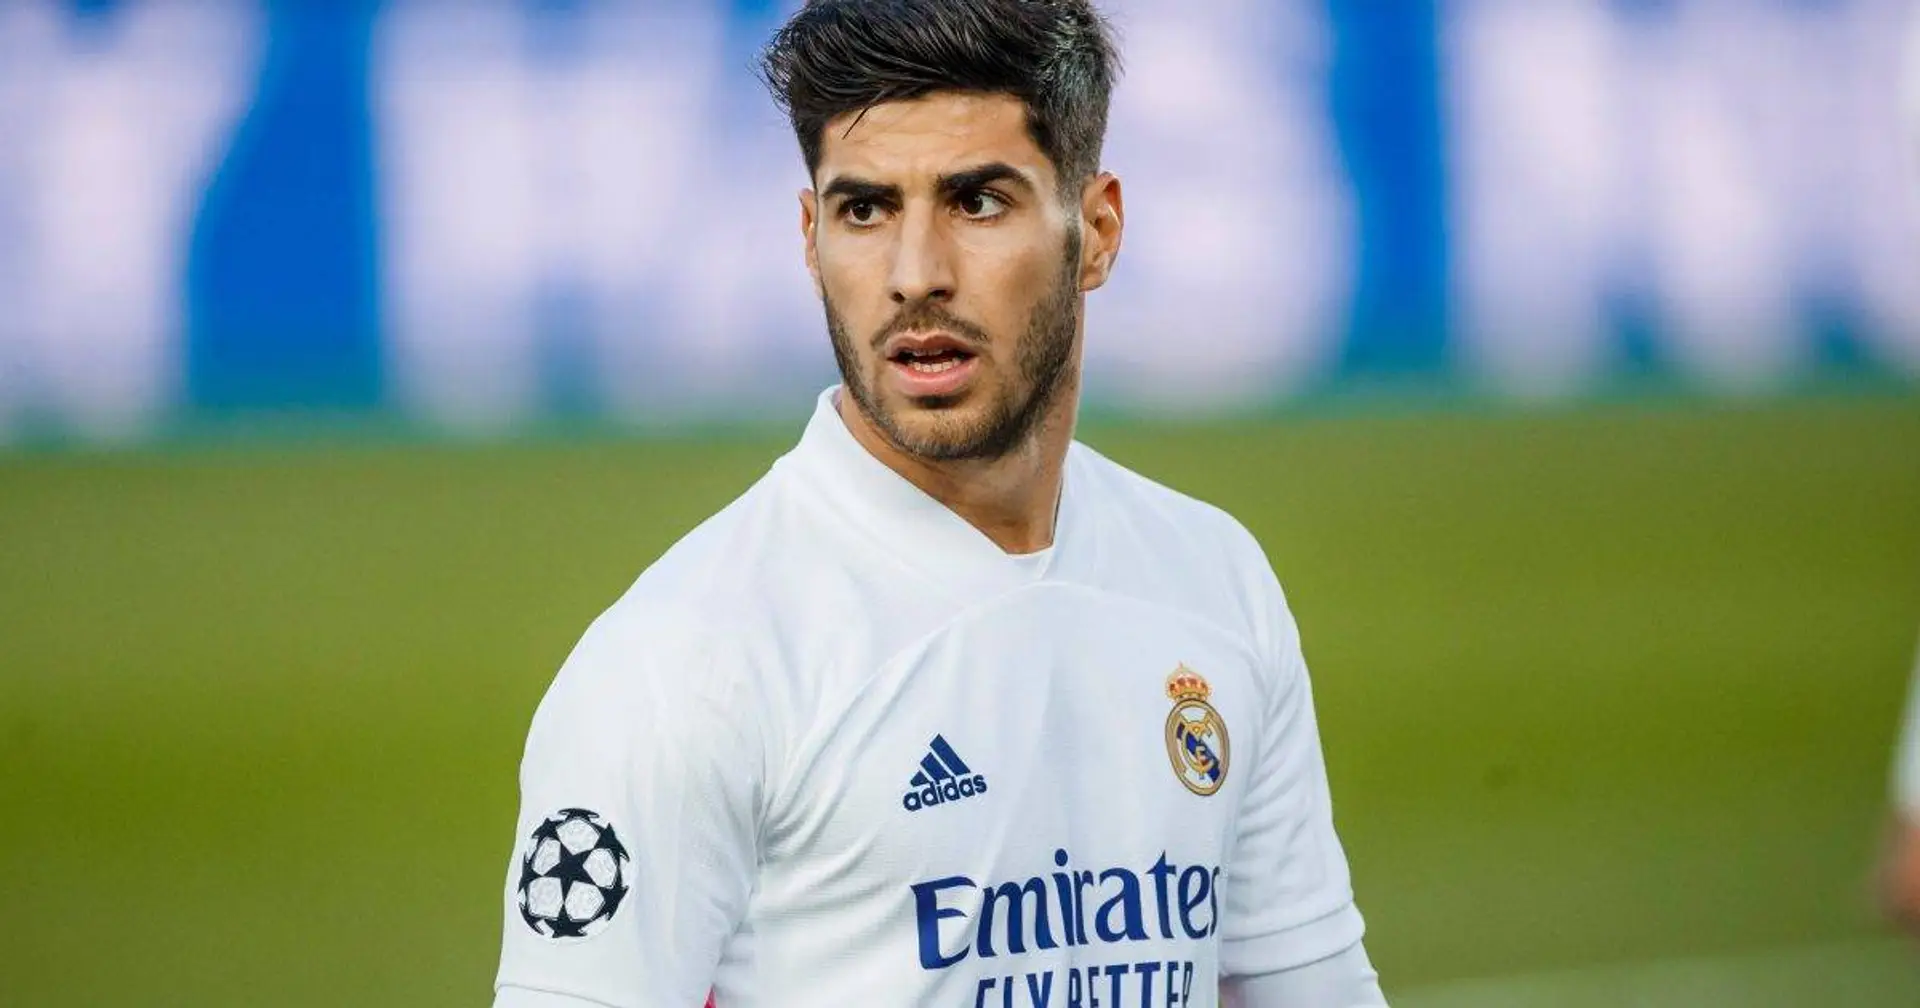 'Pure class liability', 'Another Jese': Madrid global fan community furious about Marco Asensio's decline